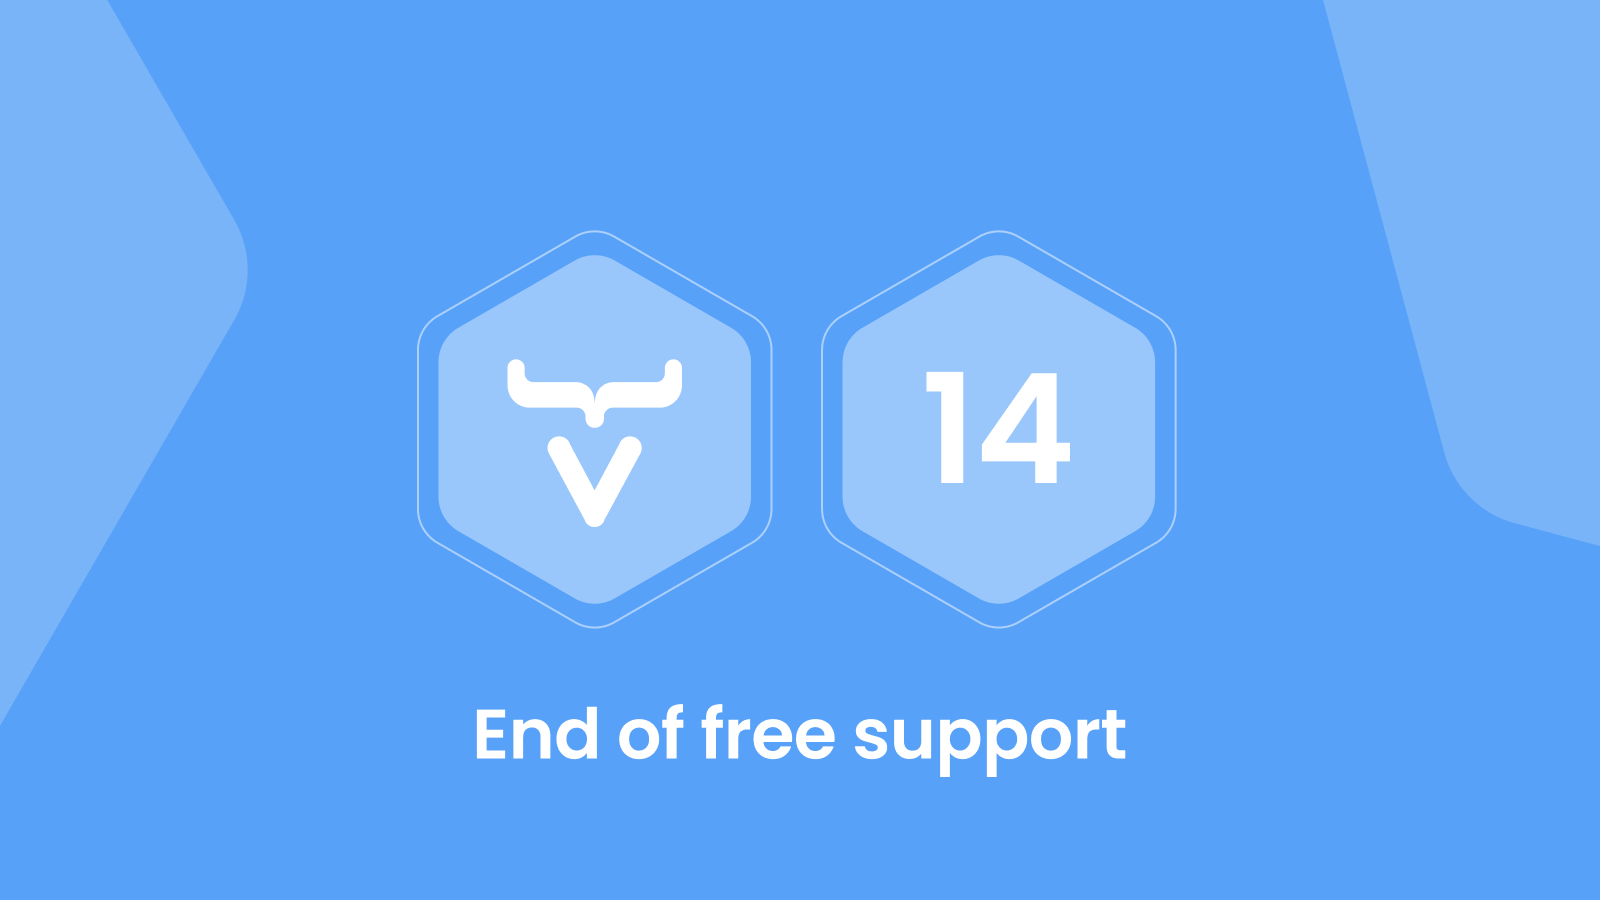 Vaadin 14 is reaching it's end of life. Here's what to do next.